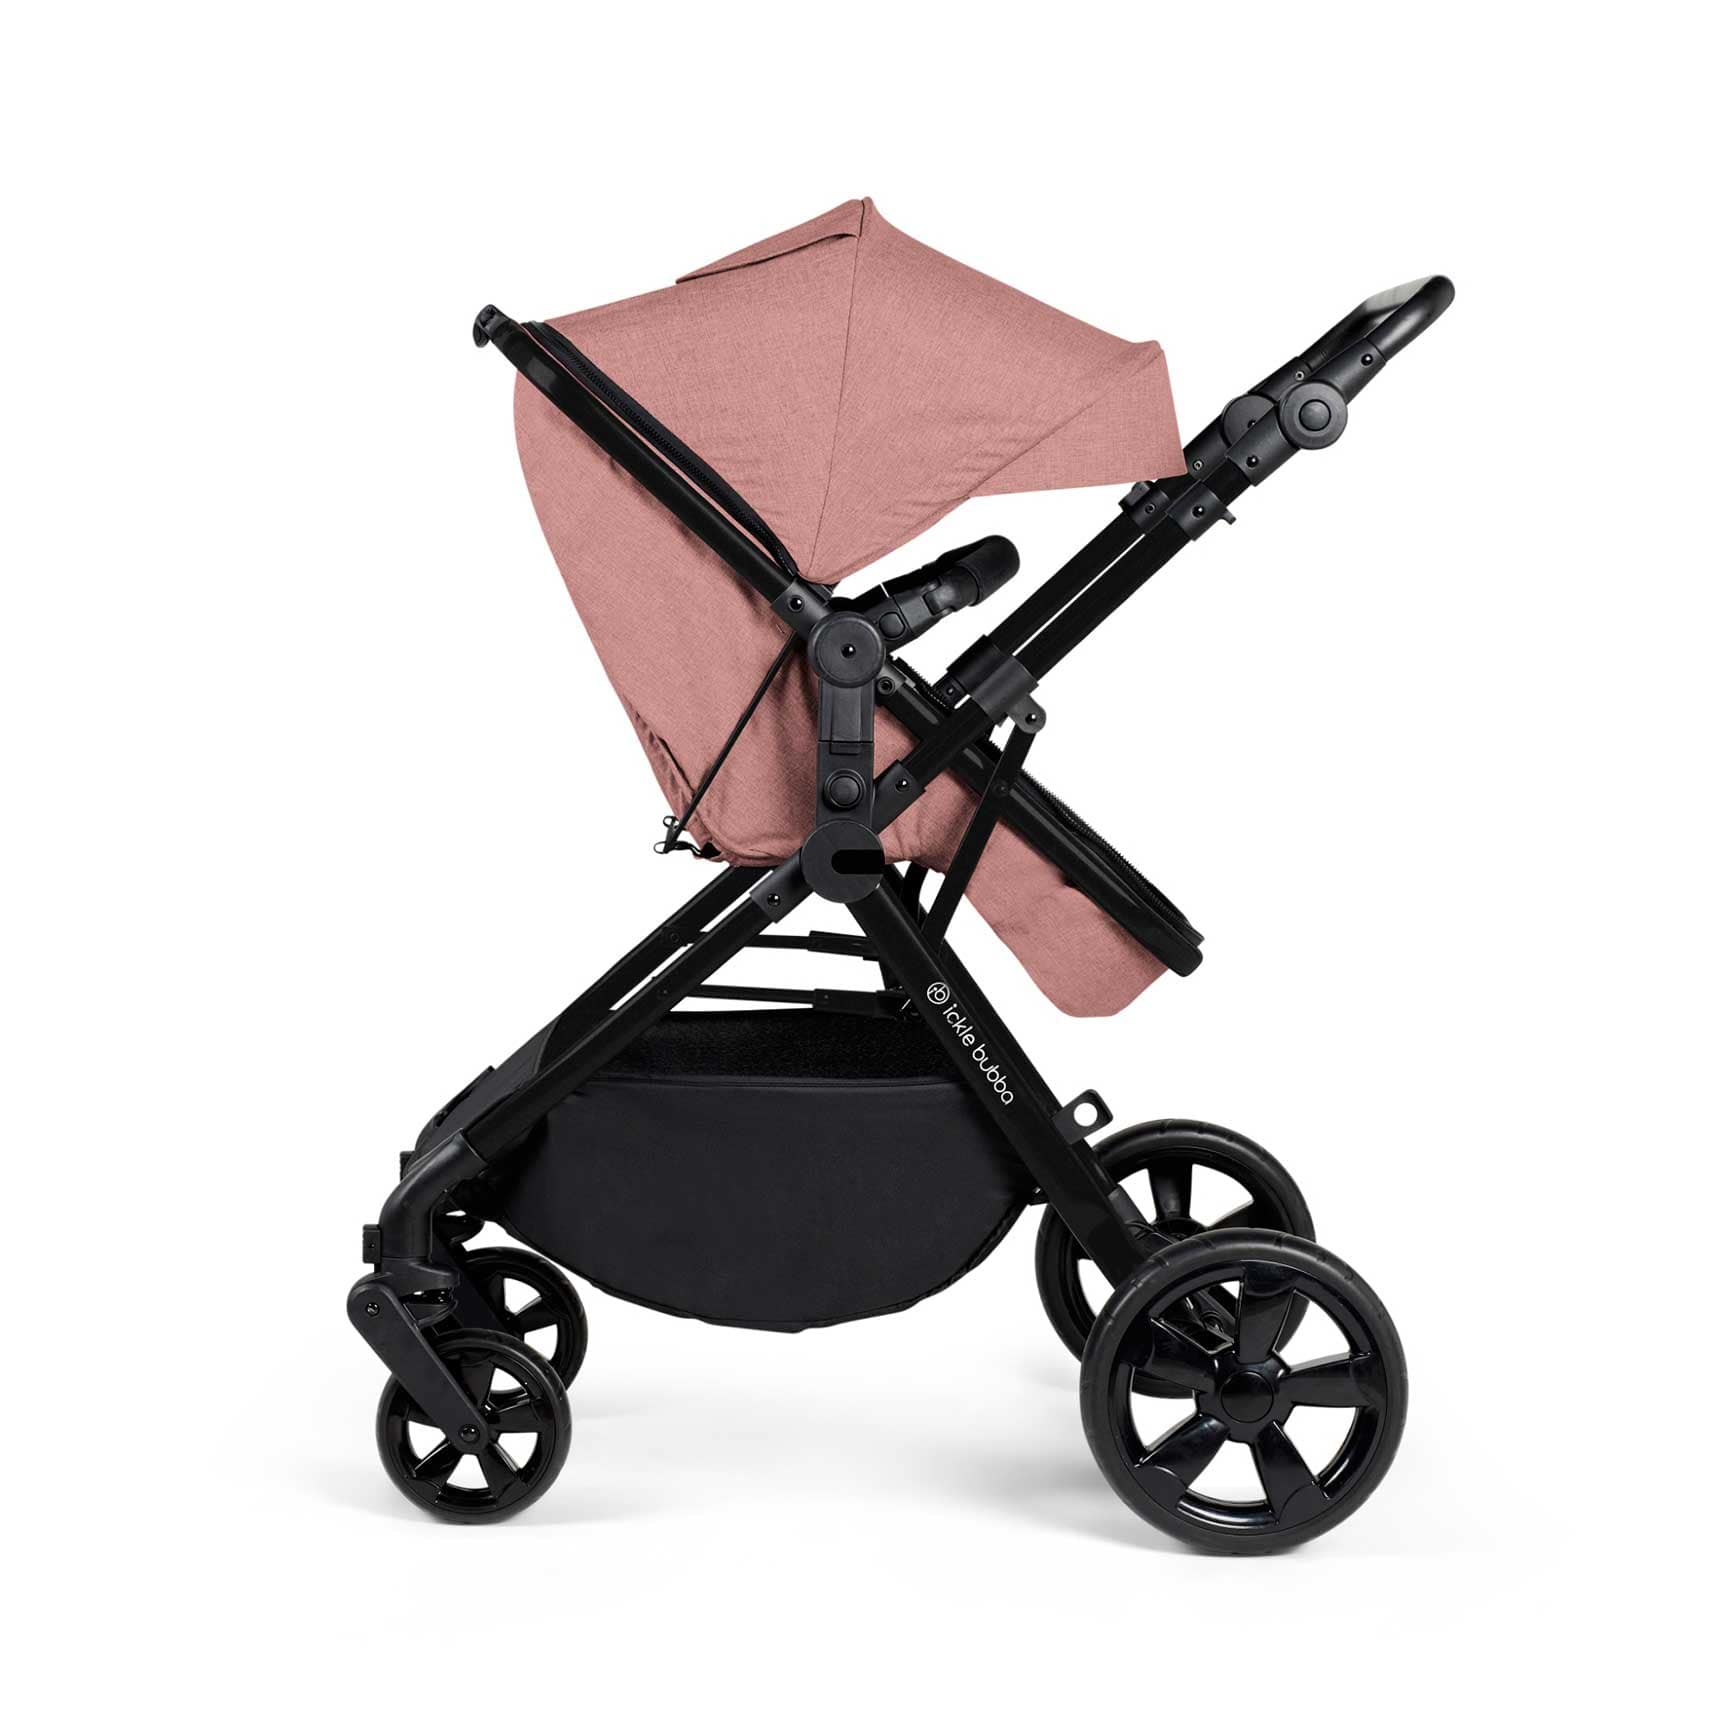 Ickle Bubba baby prams Ickle Bubba Comet All-in-One I-Size Travel System with Isofix Base - Dusty Pink 10-008-300-134